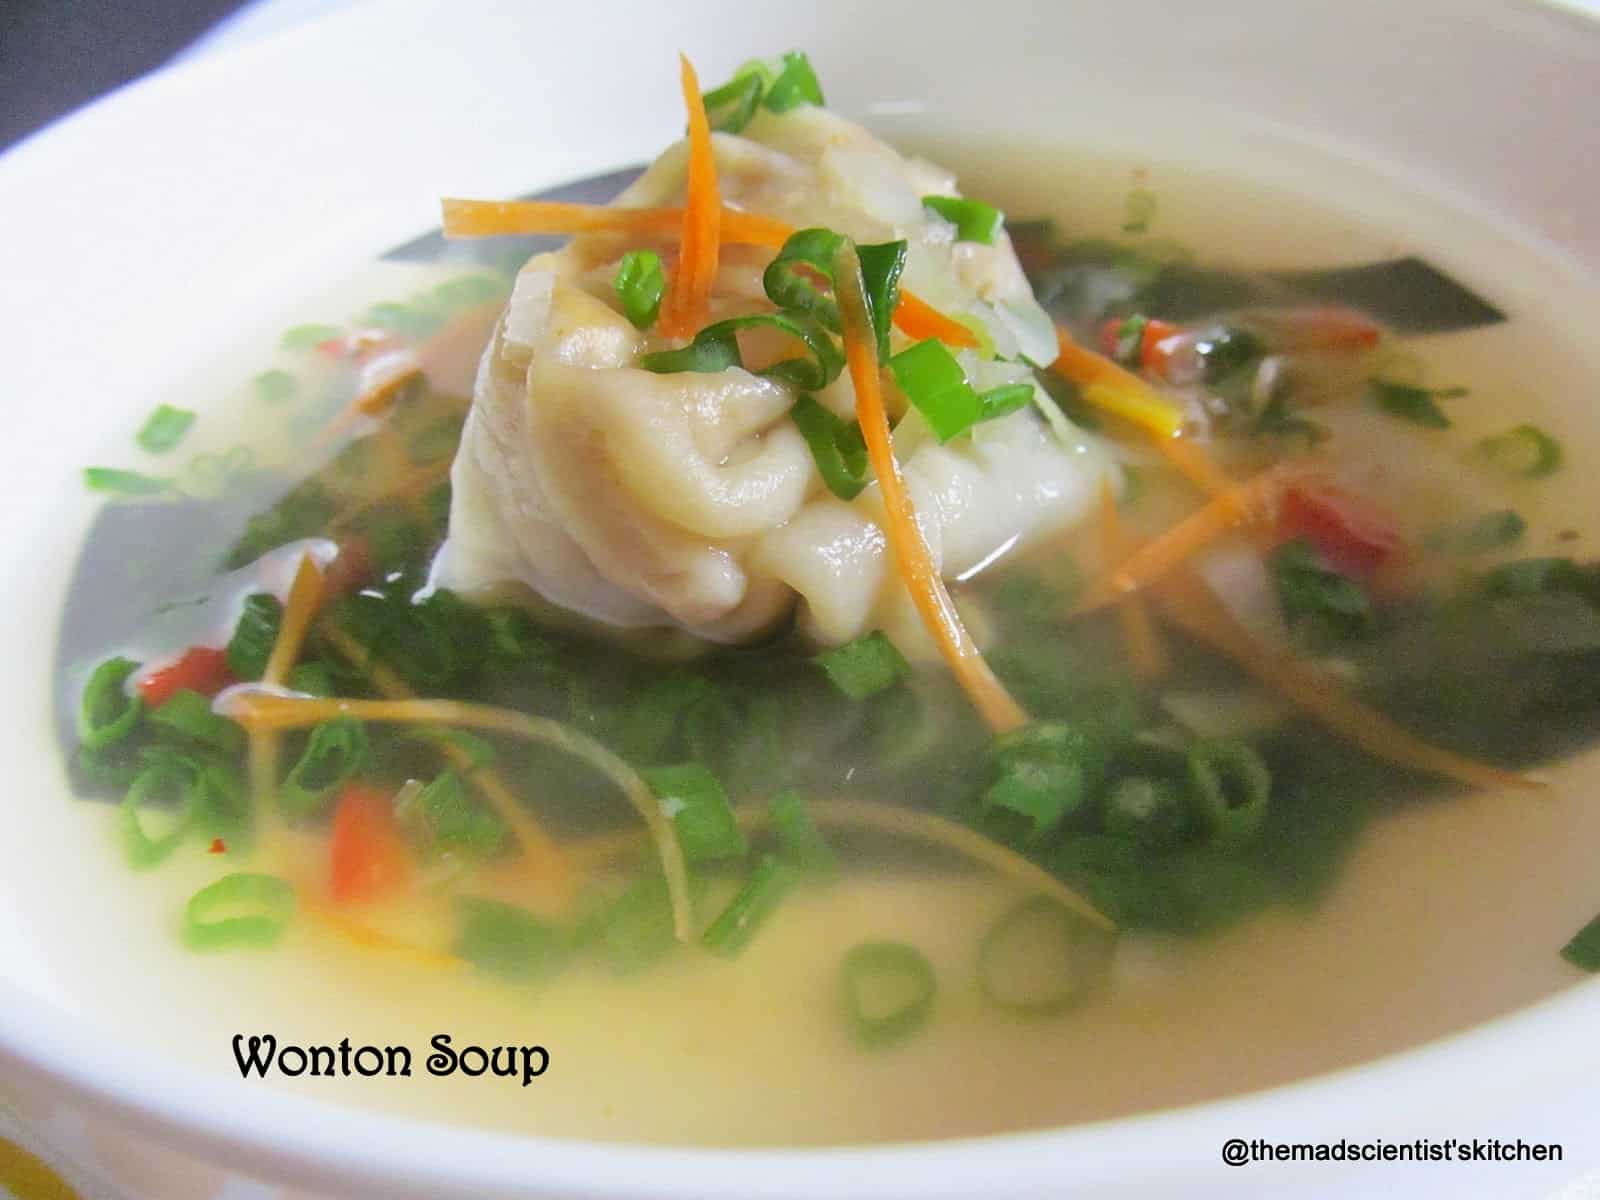 Vegetarian Wonton Soup that I had made ages ago still remember the taste.